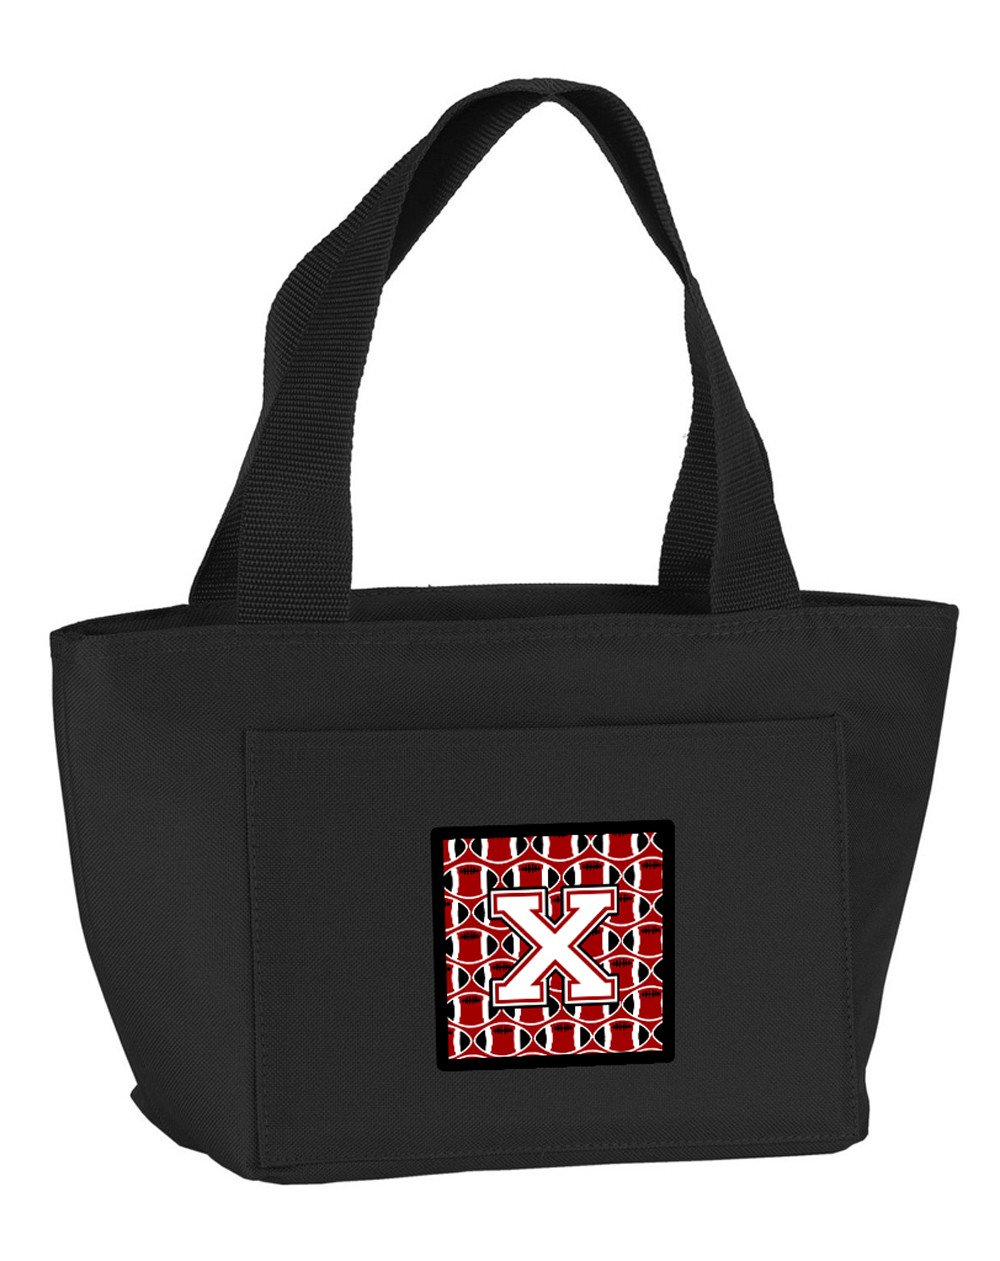 Letter X Football Cardinal and White Lunch Bag CJ1082-XBK-8808 by Caroline's Treasures